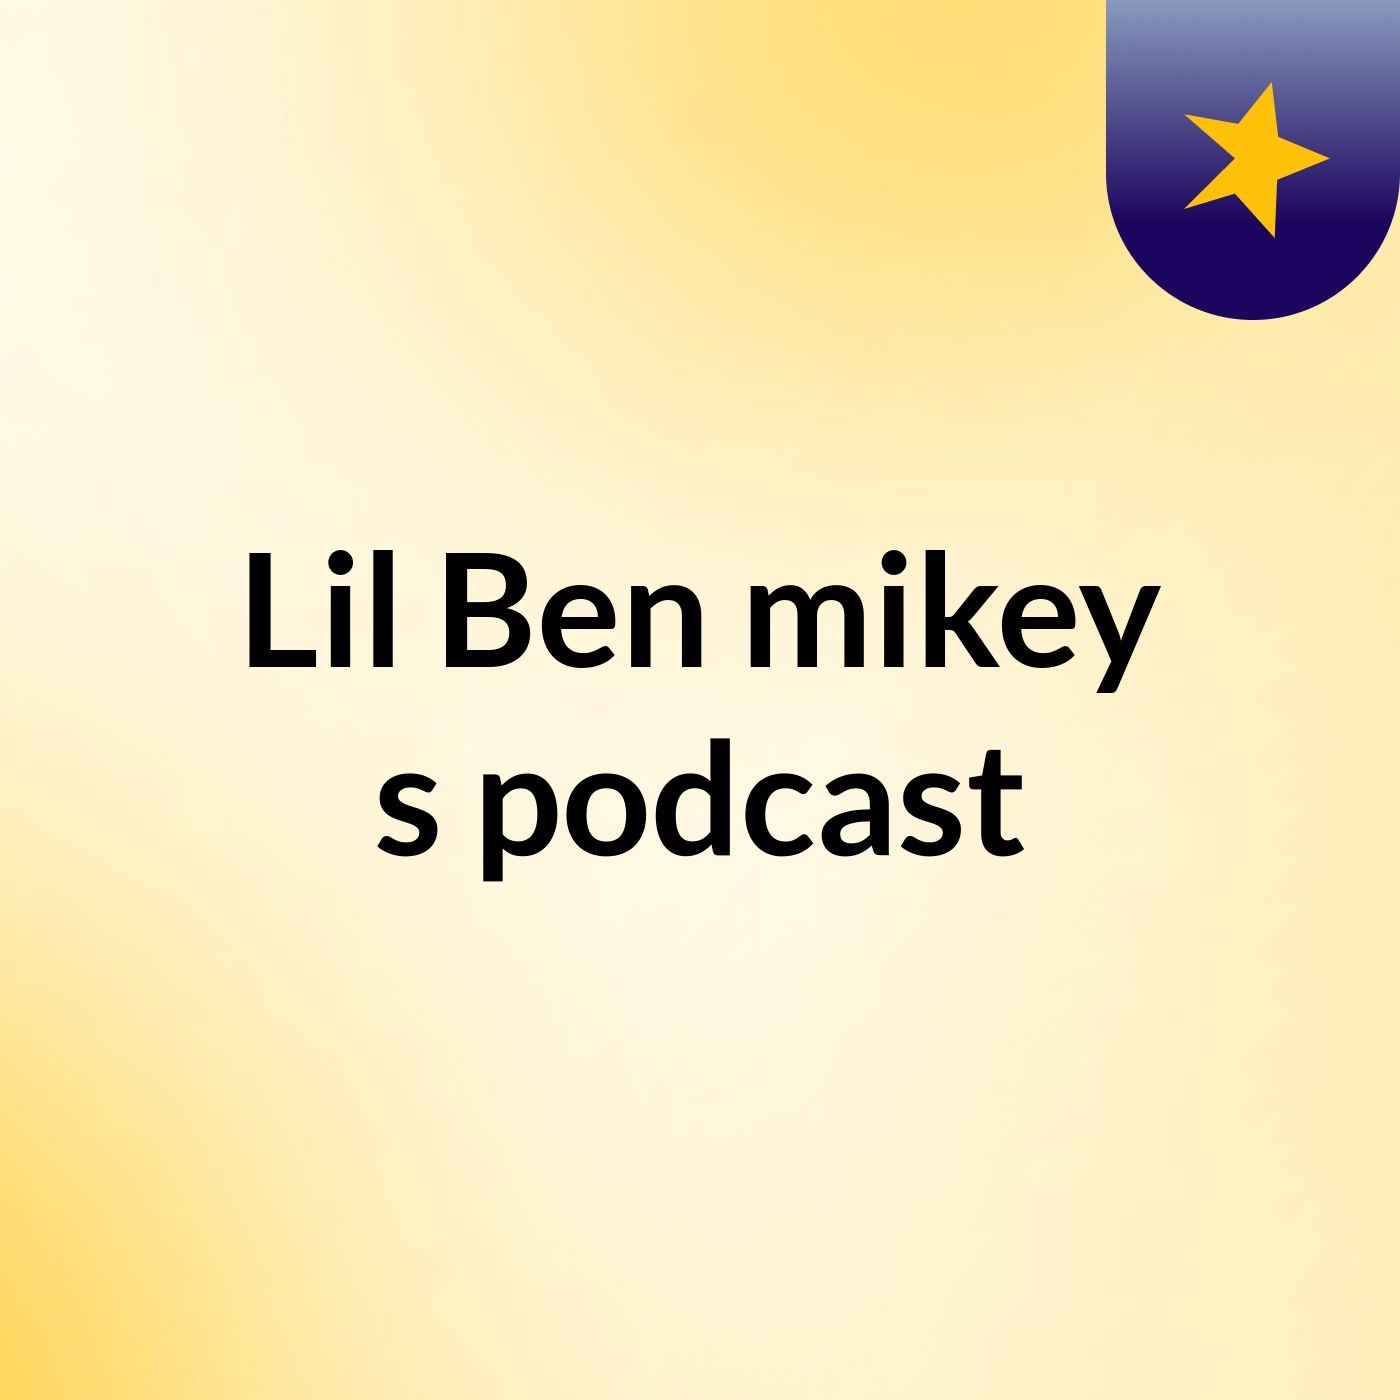 Episode 3 - Lil Ben mikey's podcast